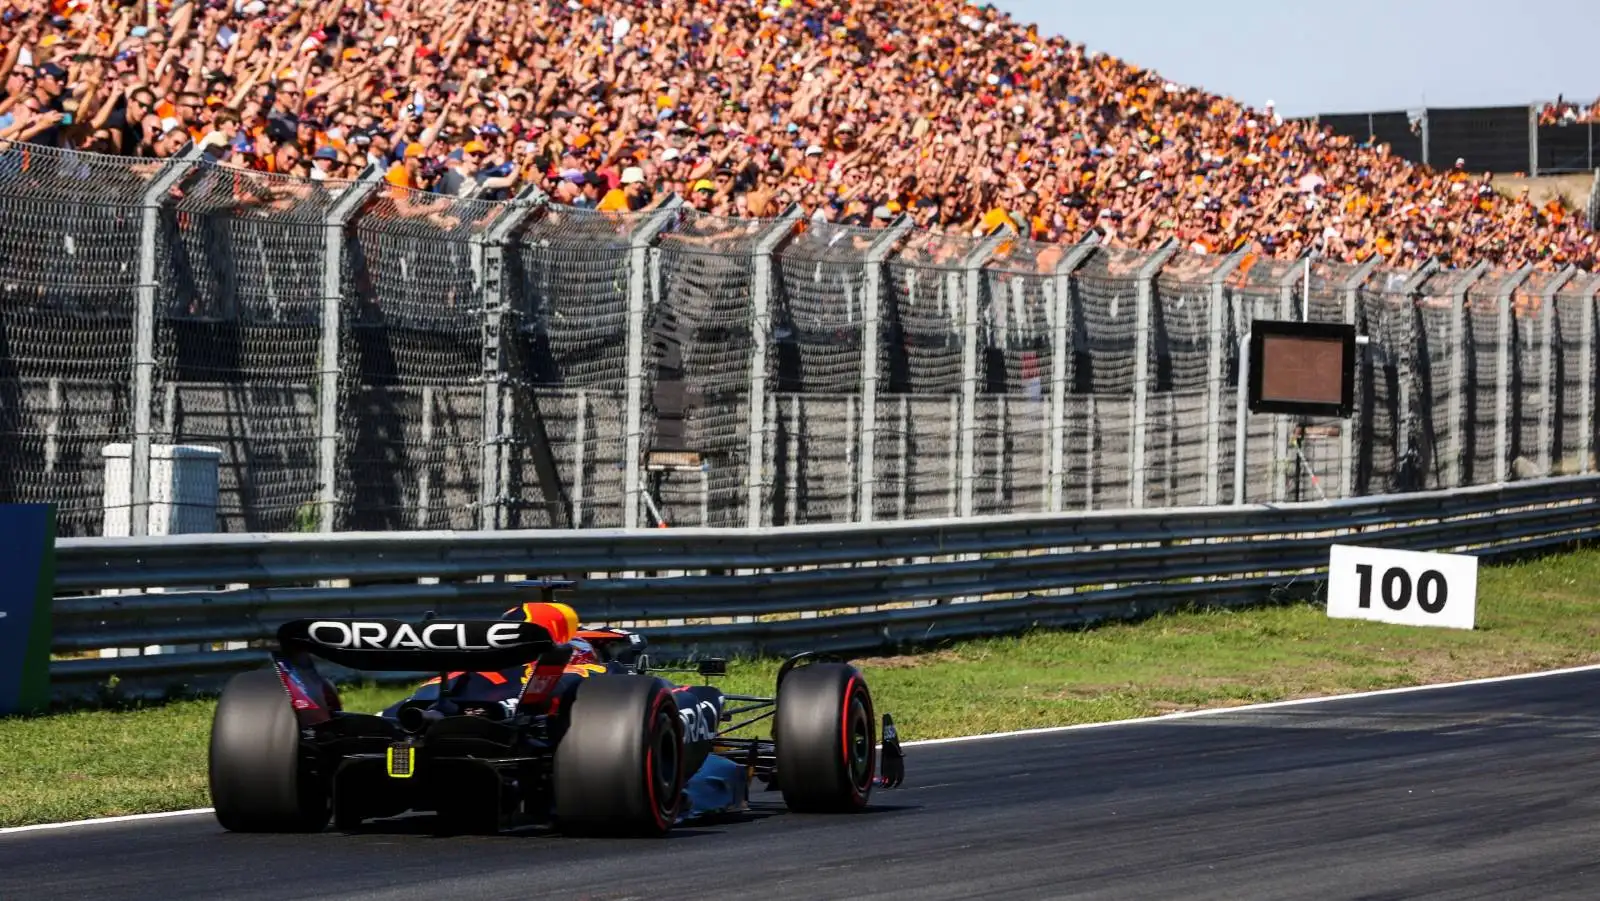 Max Verstappen's Red Bull in front of a grandstand at the Dutch GP. Zandvoort September 2022.